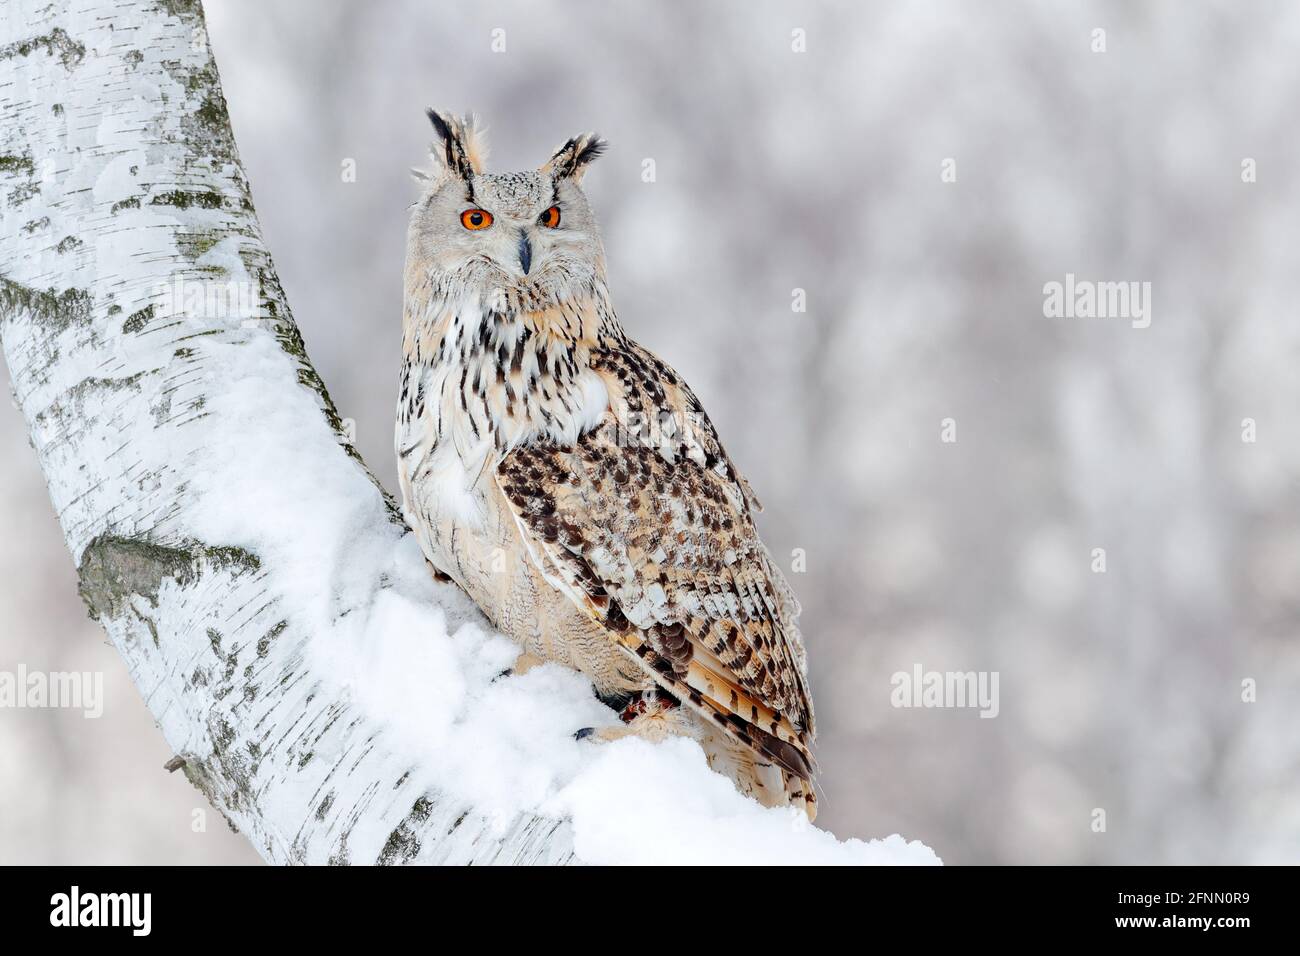 Winter scene with Big Eastern Siberian Eagle Owl, Bubo bubo sibiricus, sitting in the birch tree with snow in the forest. Stock Photo